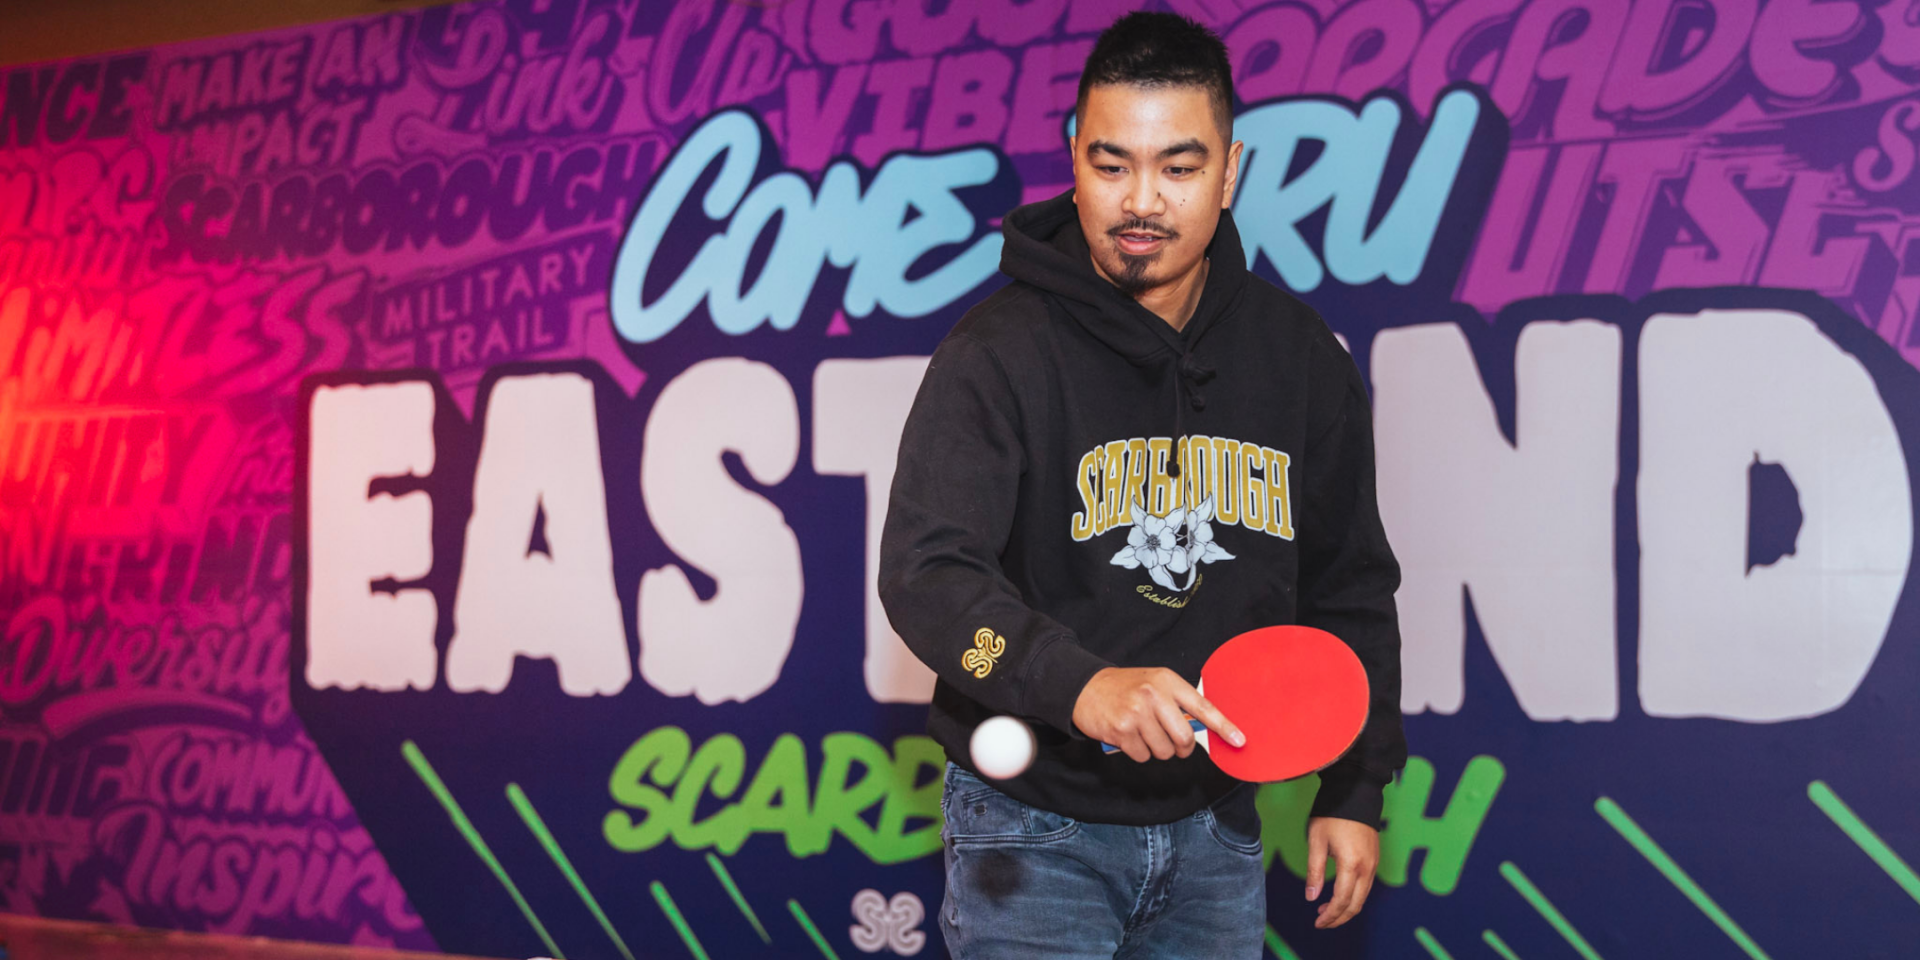 Creator of Scarborough Spots Jesse Asido plays table tennis